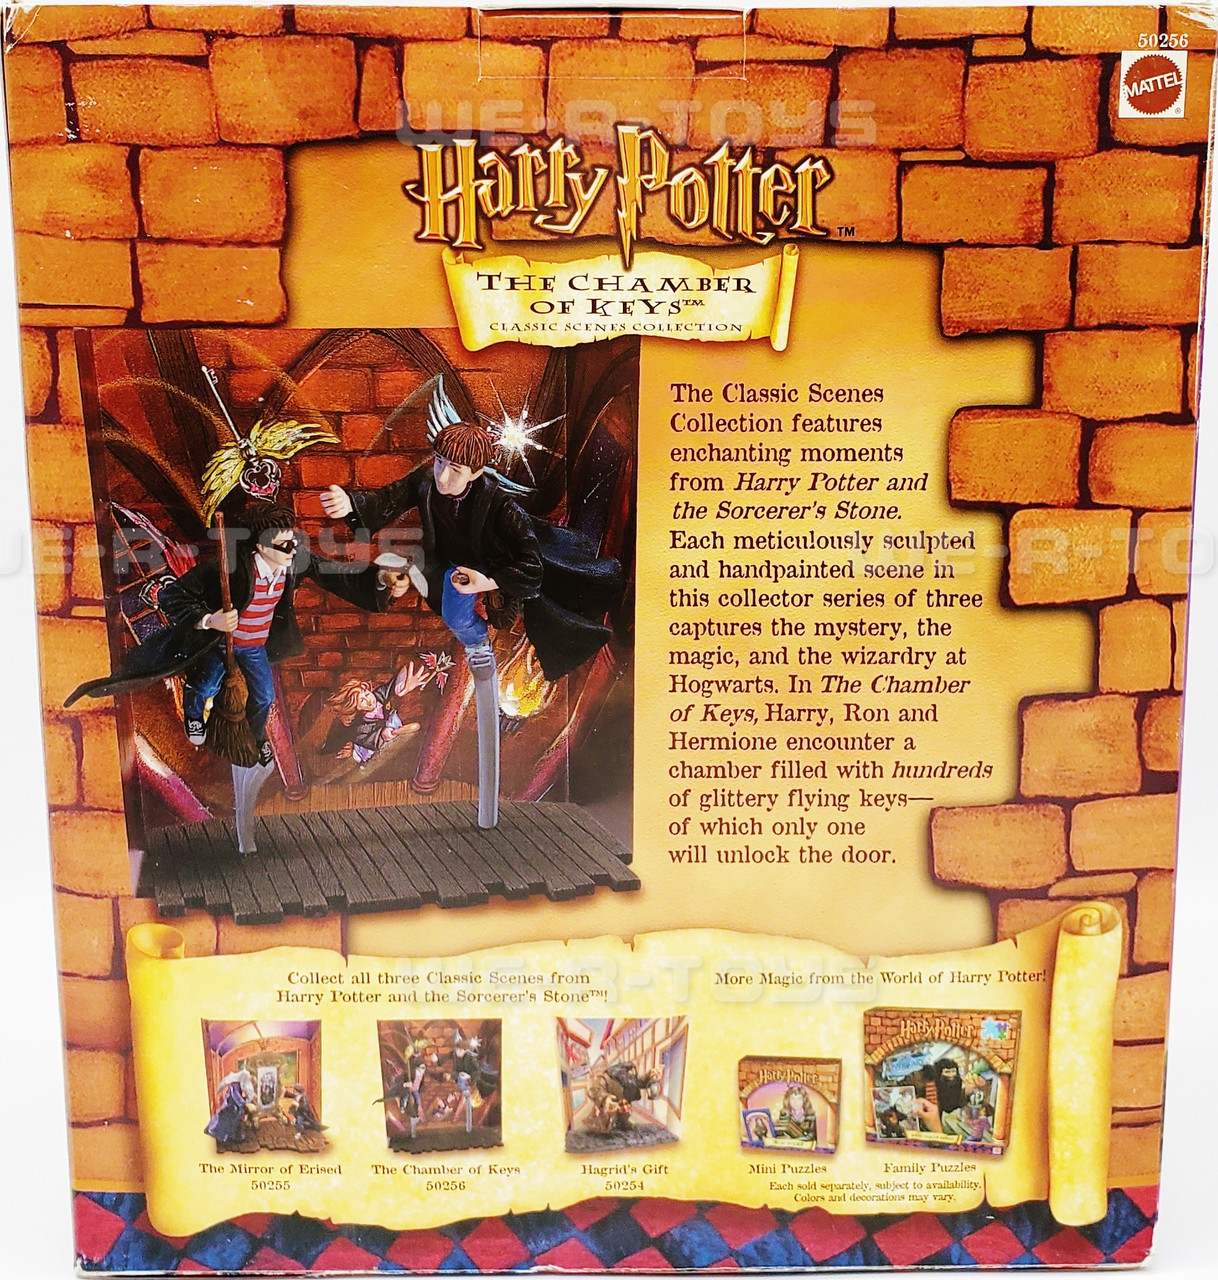 Harry Potter The Chamber of Keys Classic Scenes Collection 2001